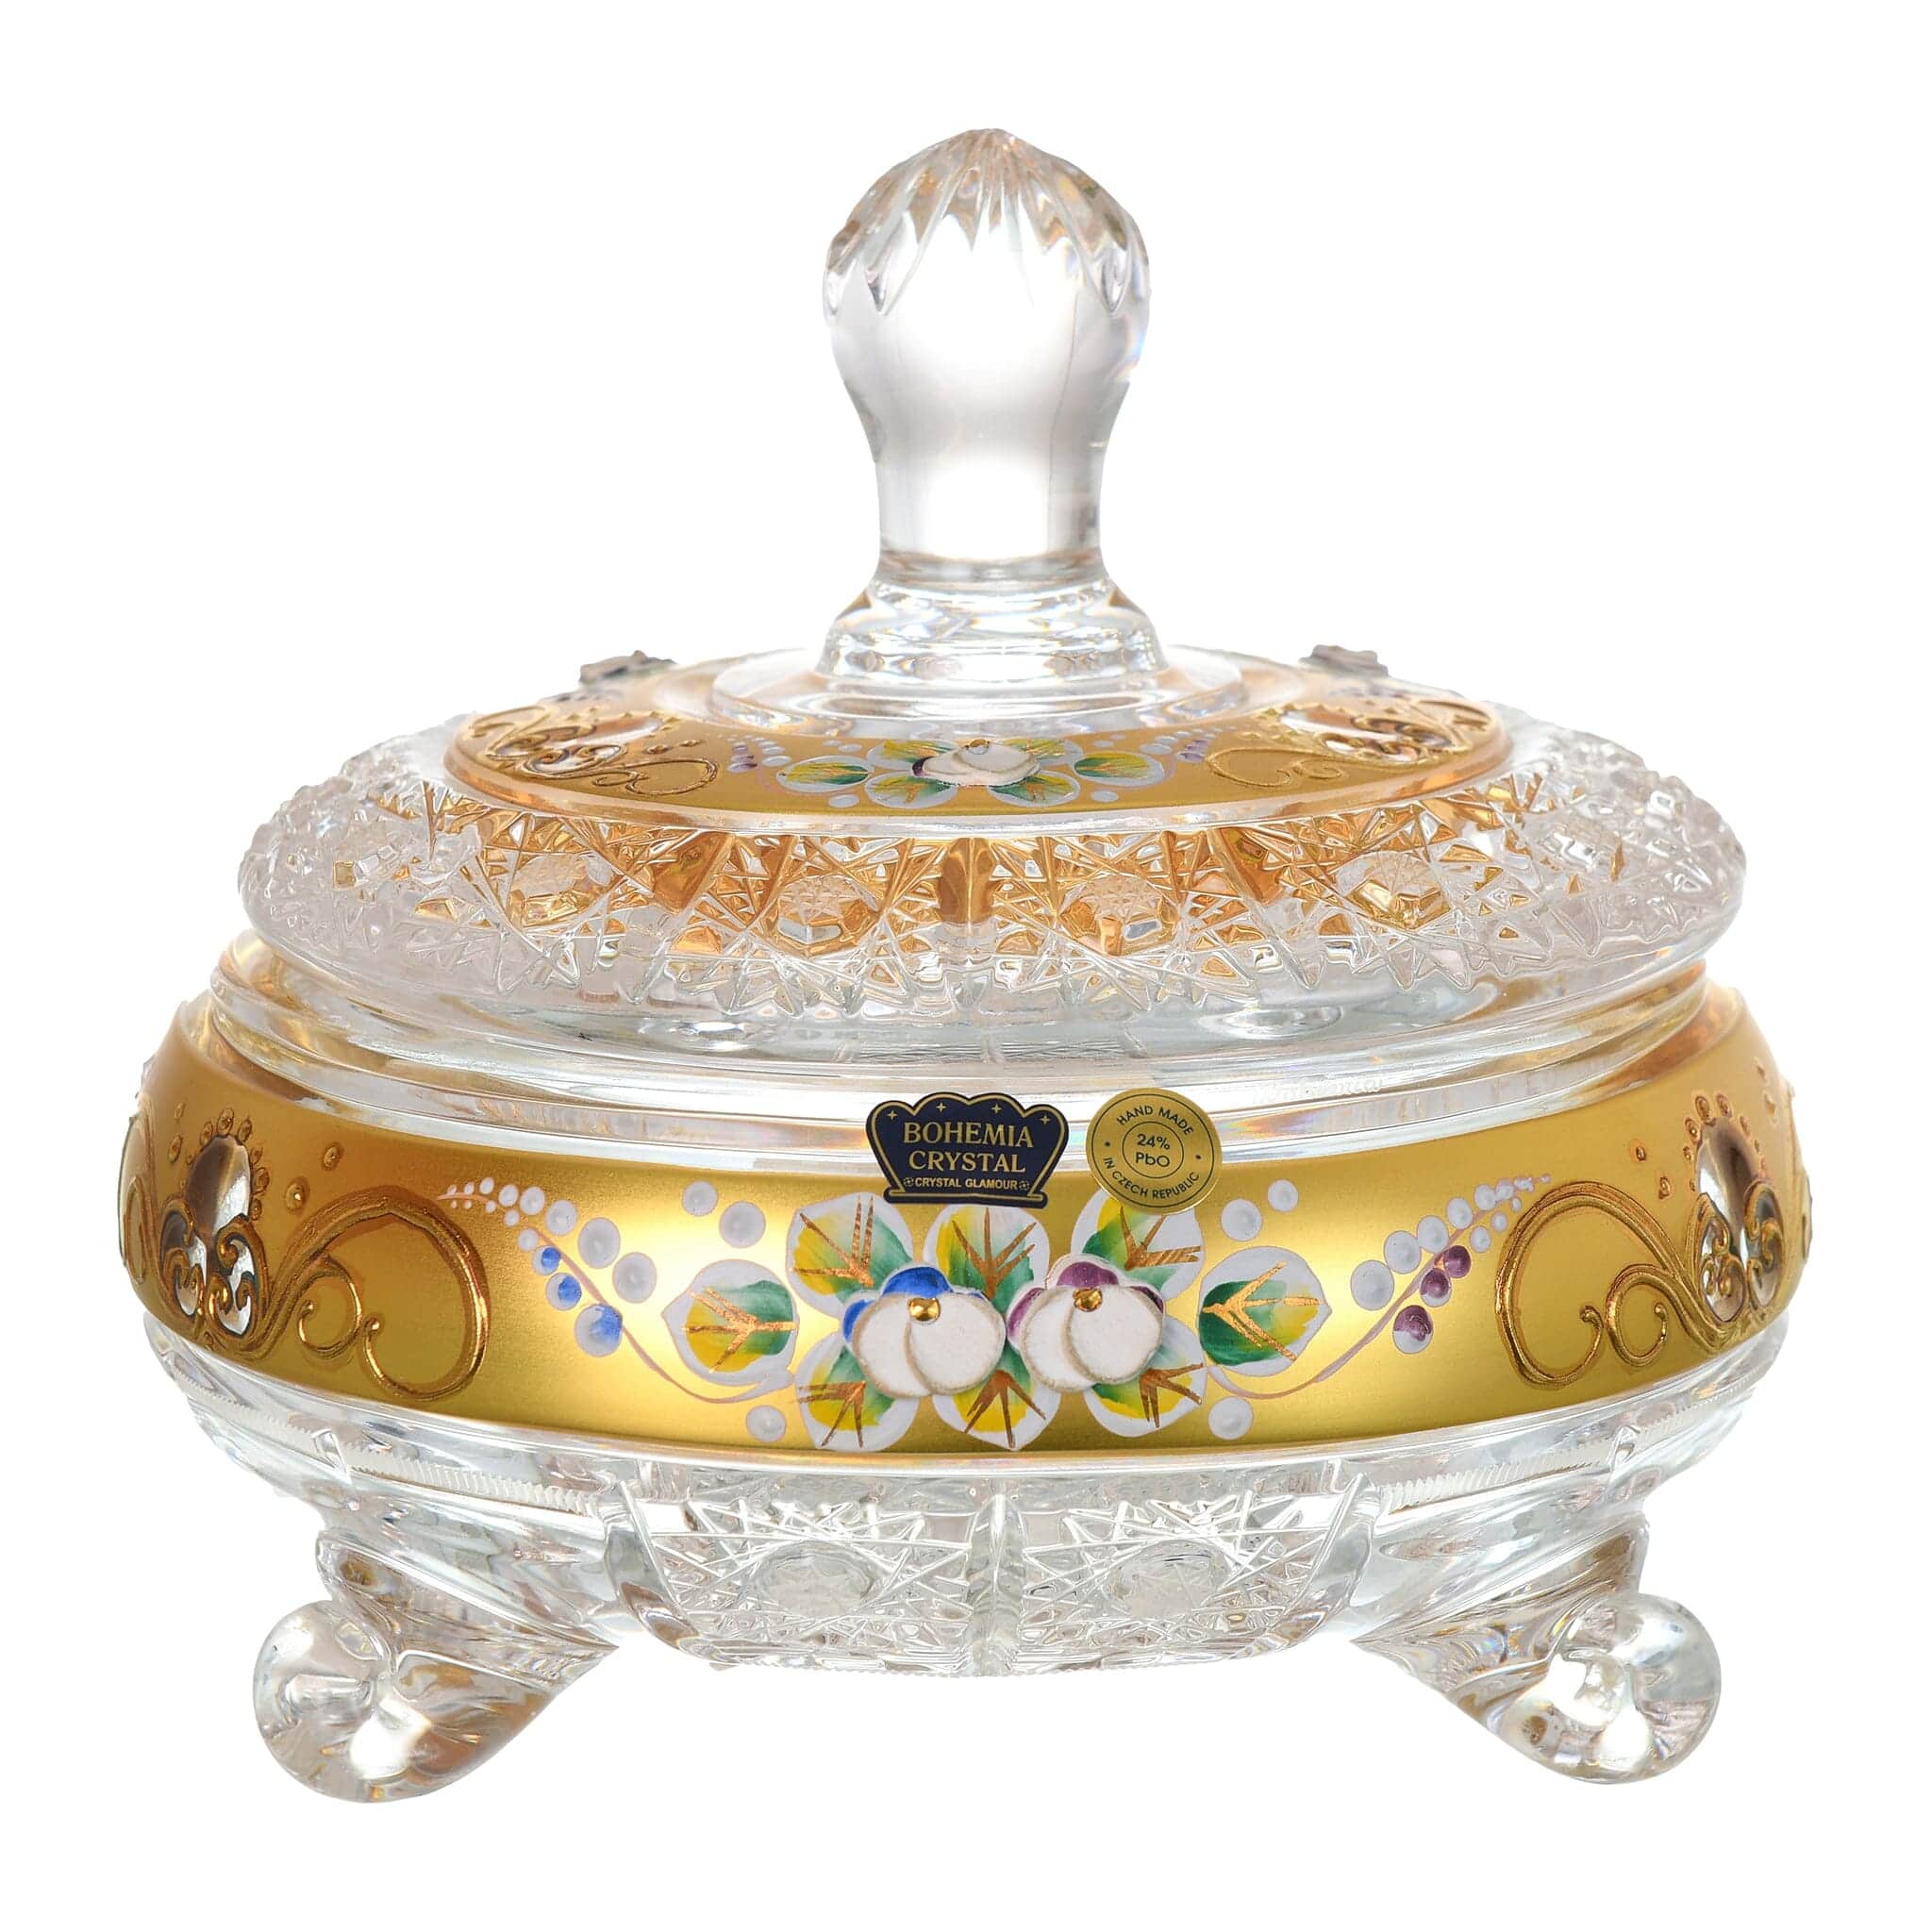 Bohemia Crystal - Crystal Box With Legs - Gold & Floral Design - 16.5cm - 270004336